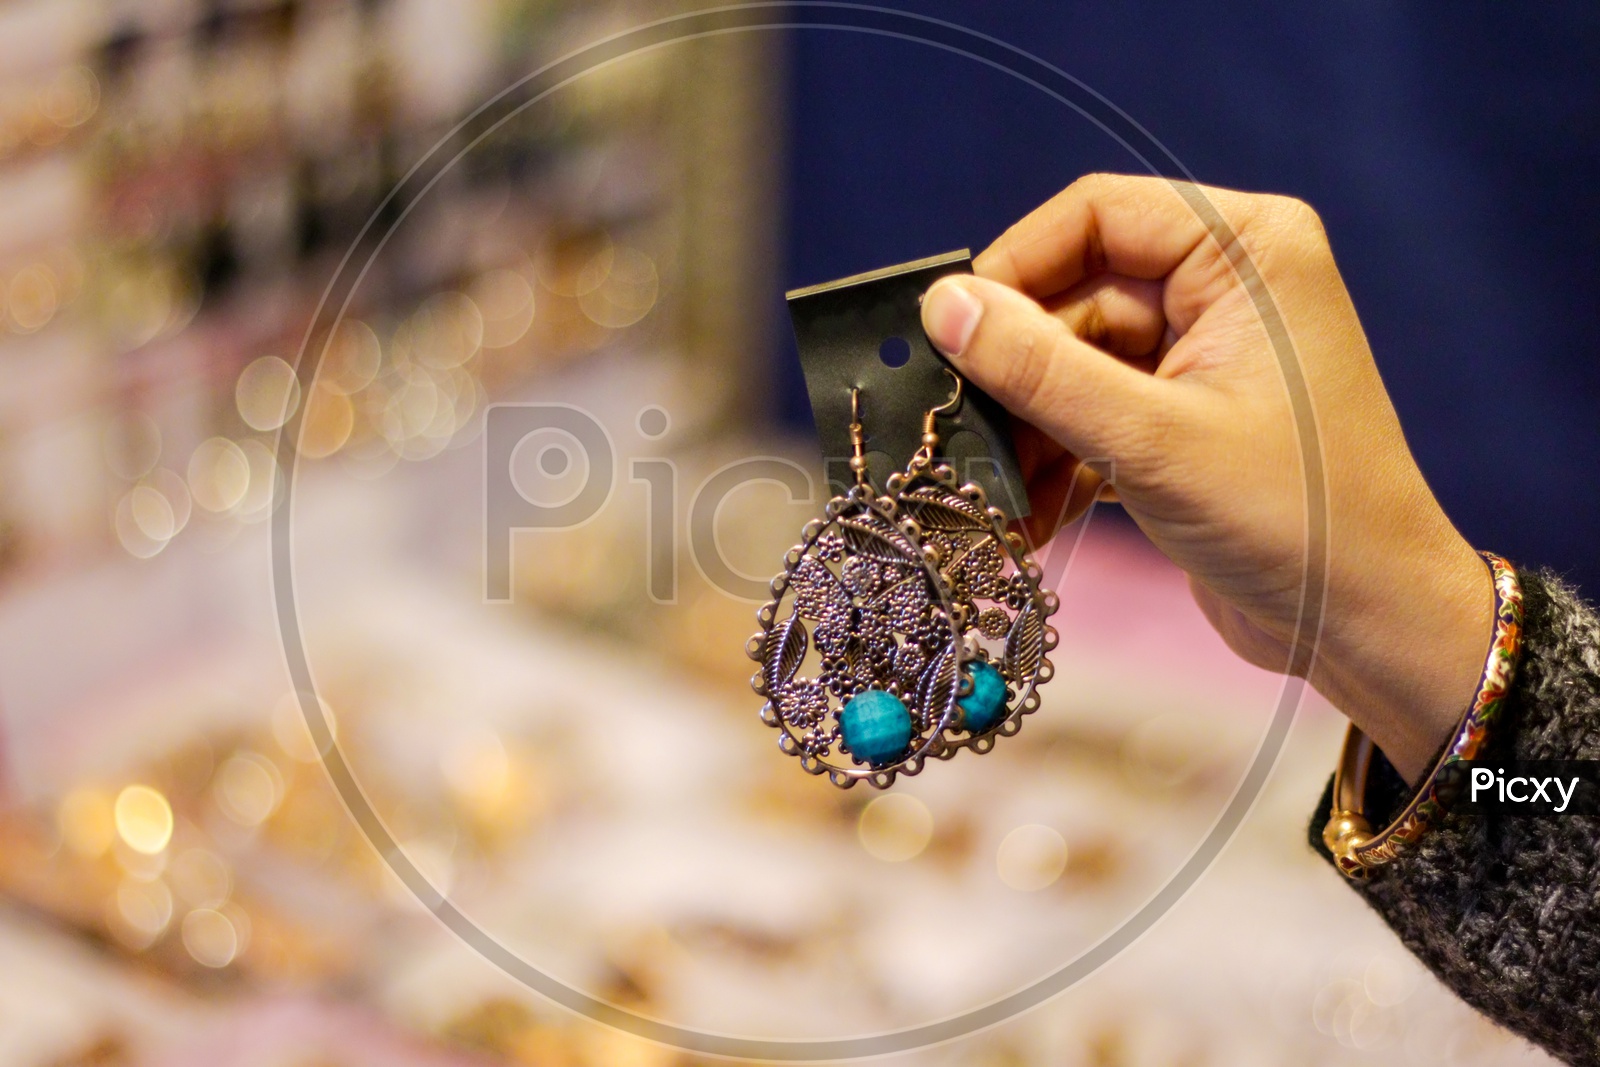 Hand Of A Lady Selecting Ear Rings Metal Junk Jewellery At A Shop.